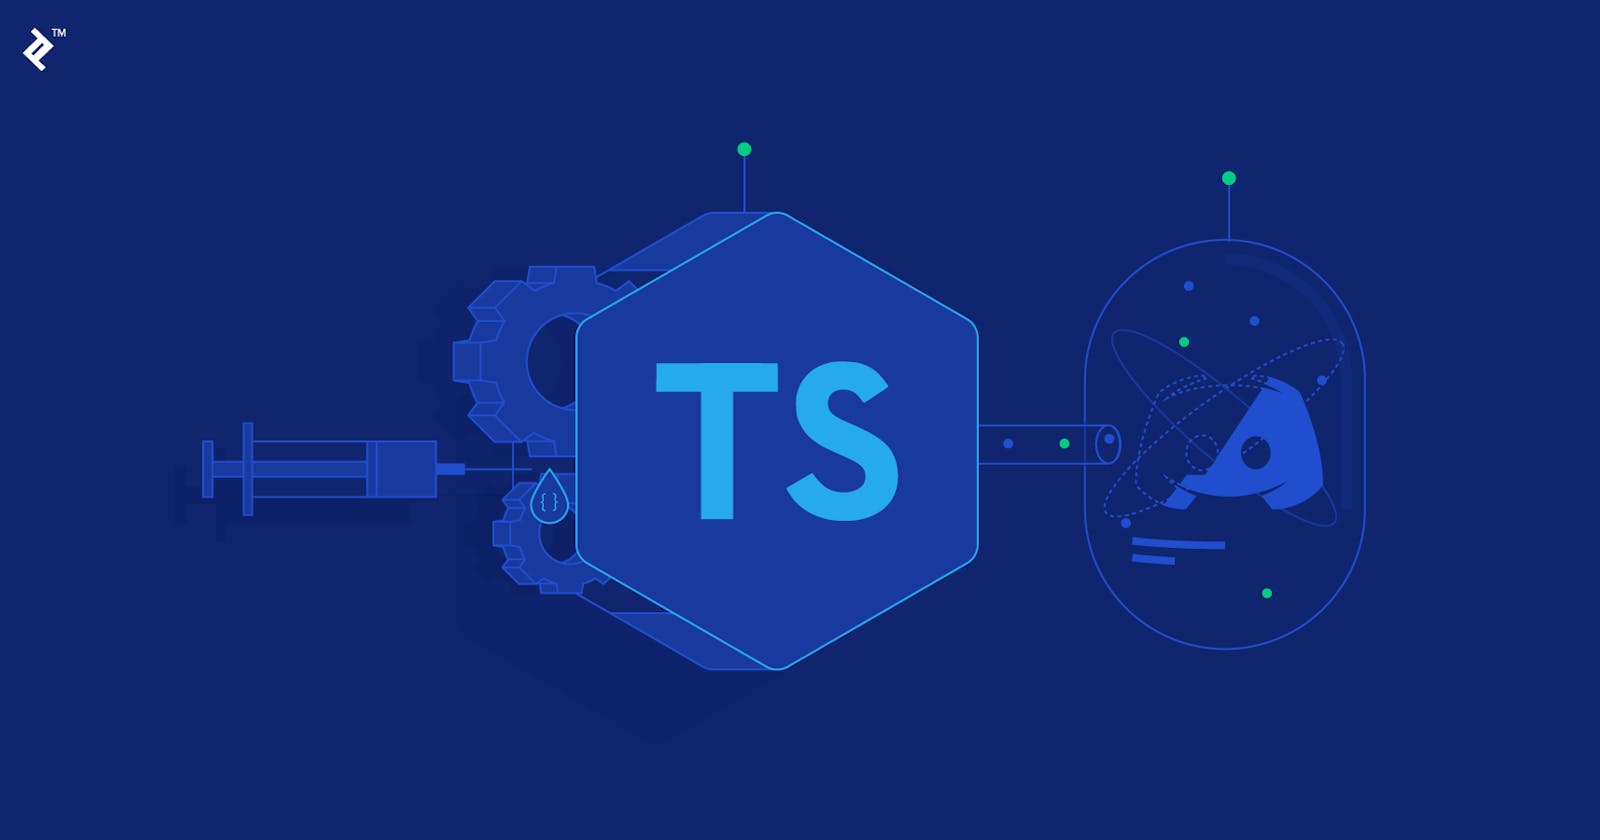 Get Your Feet Wet With Typescript